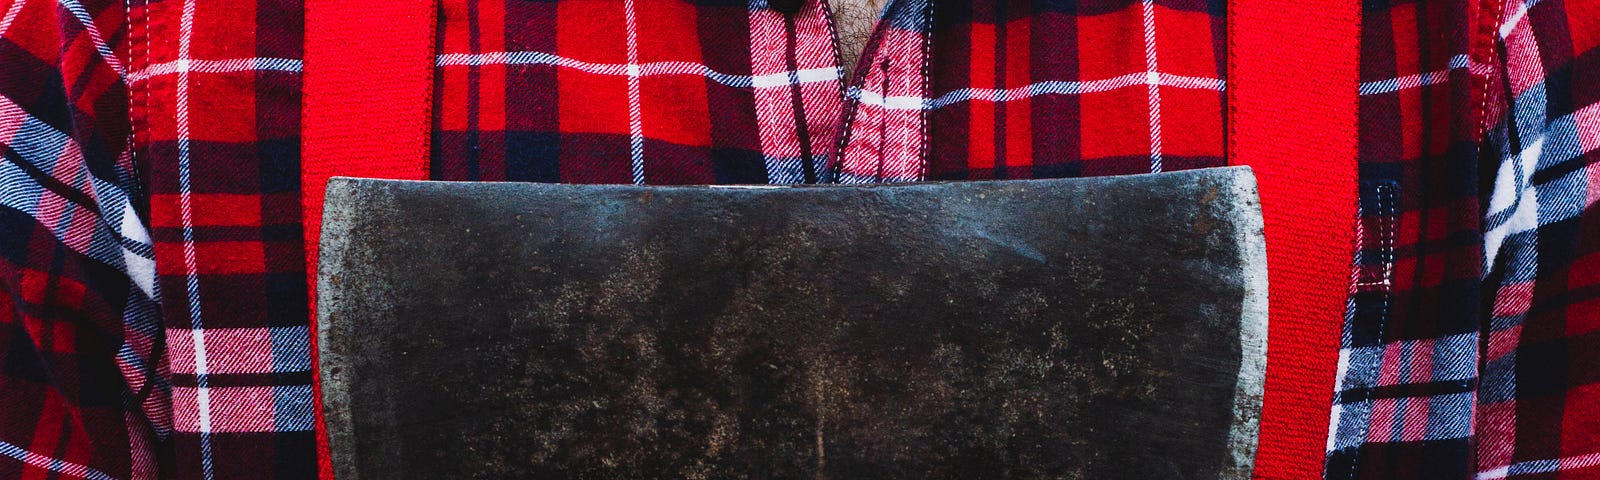 A manly man holding a manly axe before his chest. He’s wearing a flannel shirt, resembling the traditional image of an old lumberjack. His face is cut off, but we do see a thick and glorious beard.